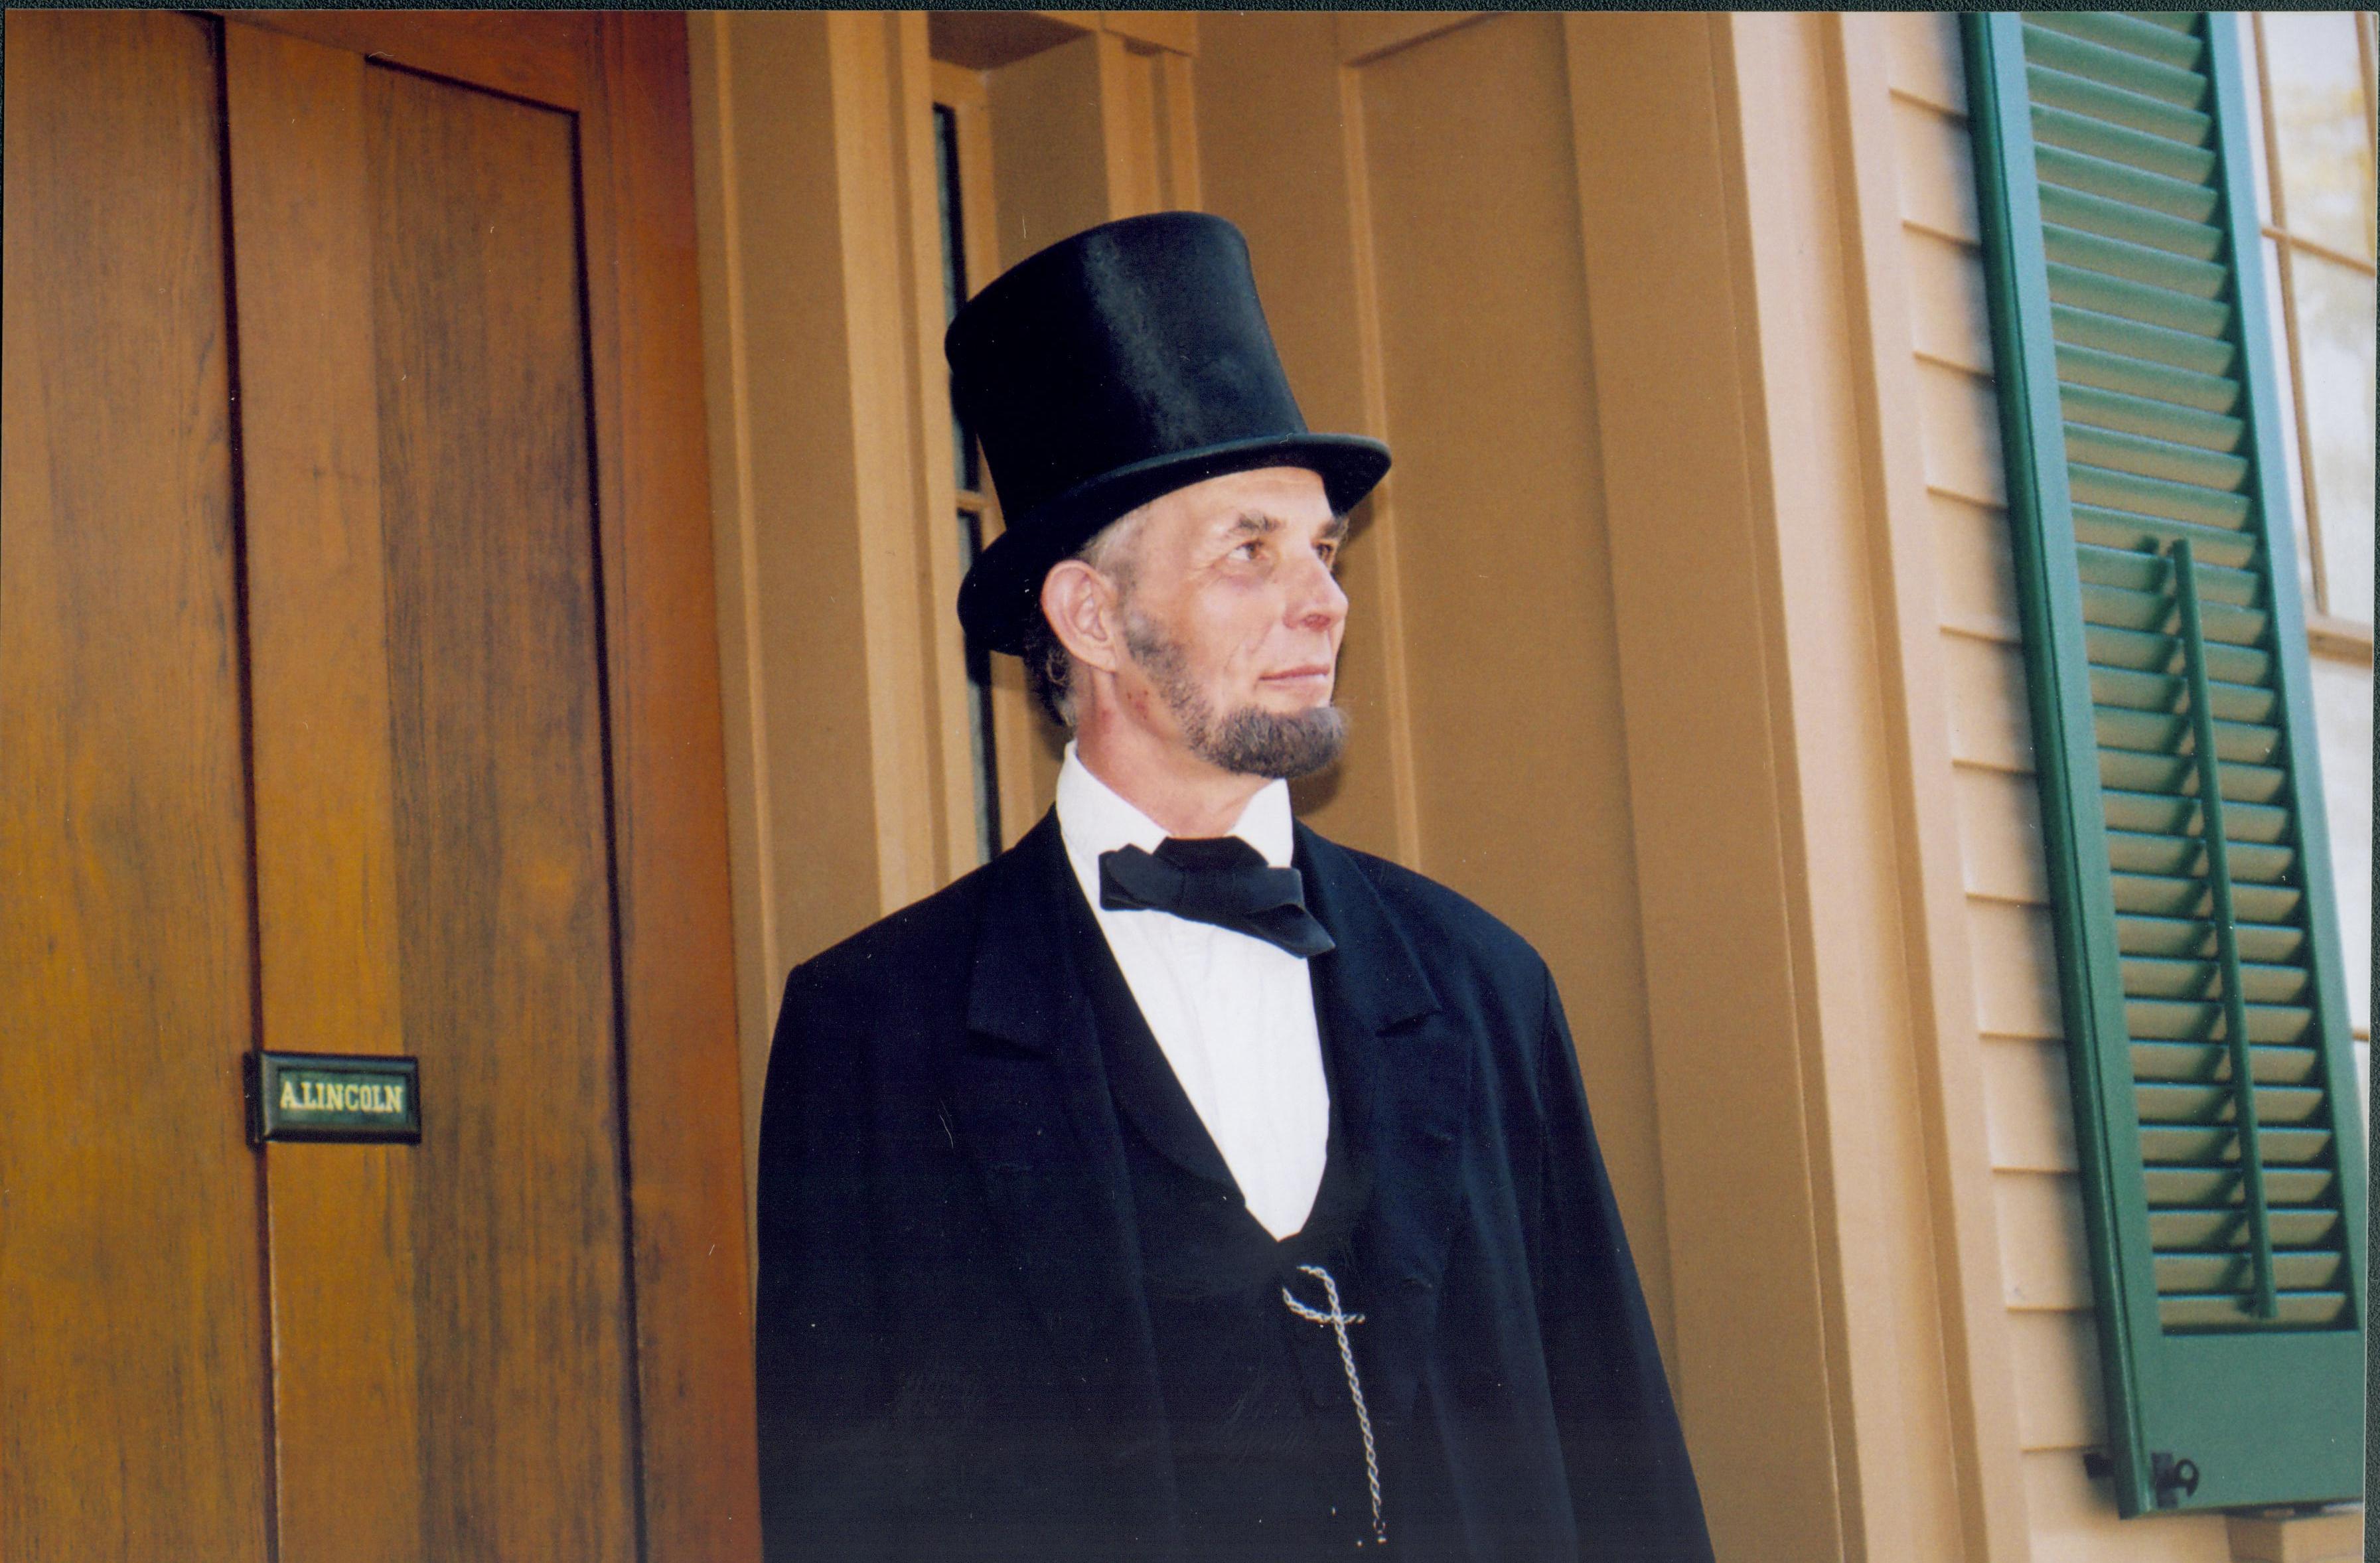 NA Lincoln Home NHS- Lincoln Presidential Museum, Disc L 7 Presidential Museum, Lincoln impersonator